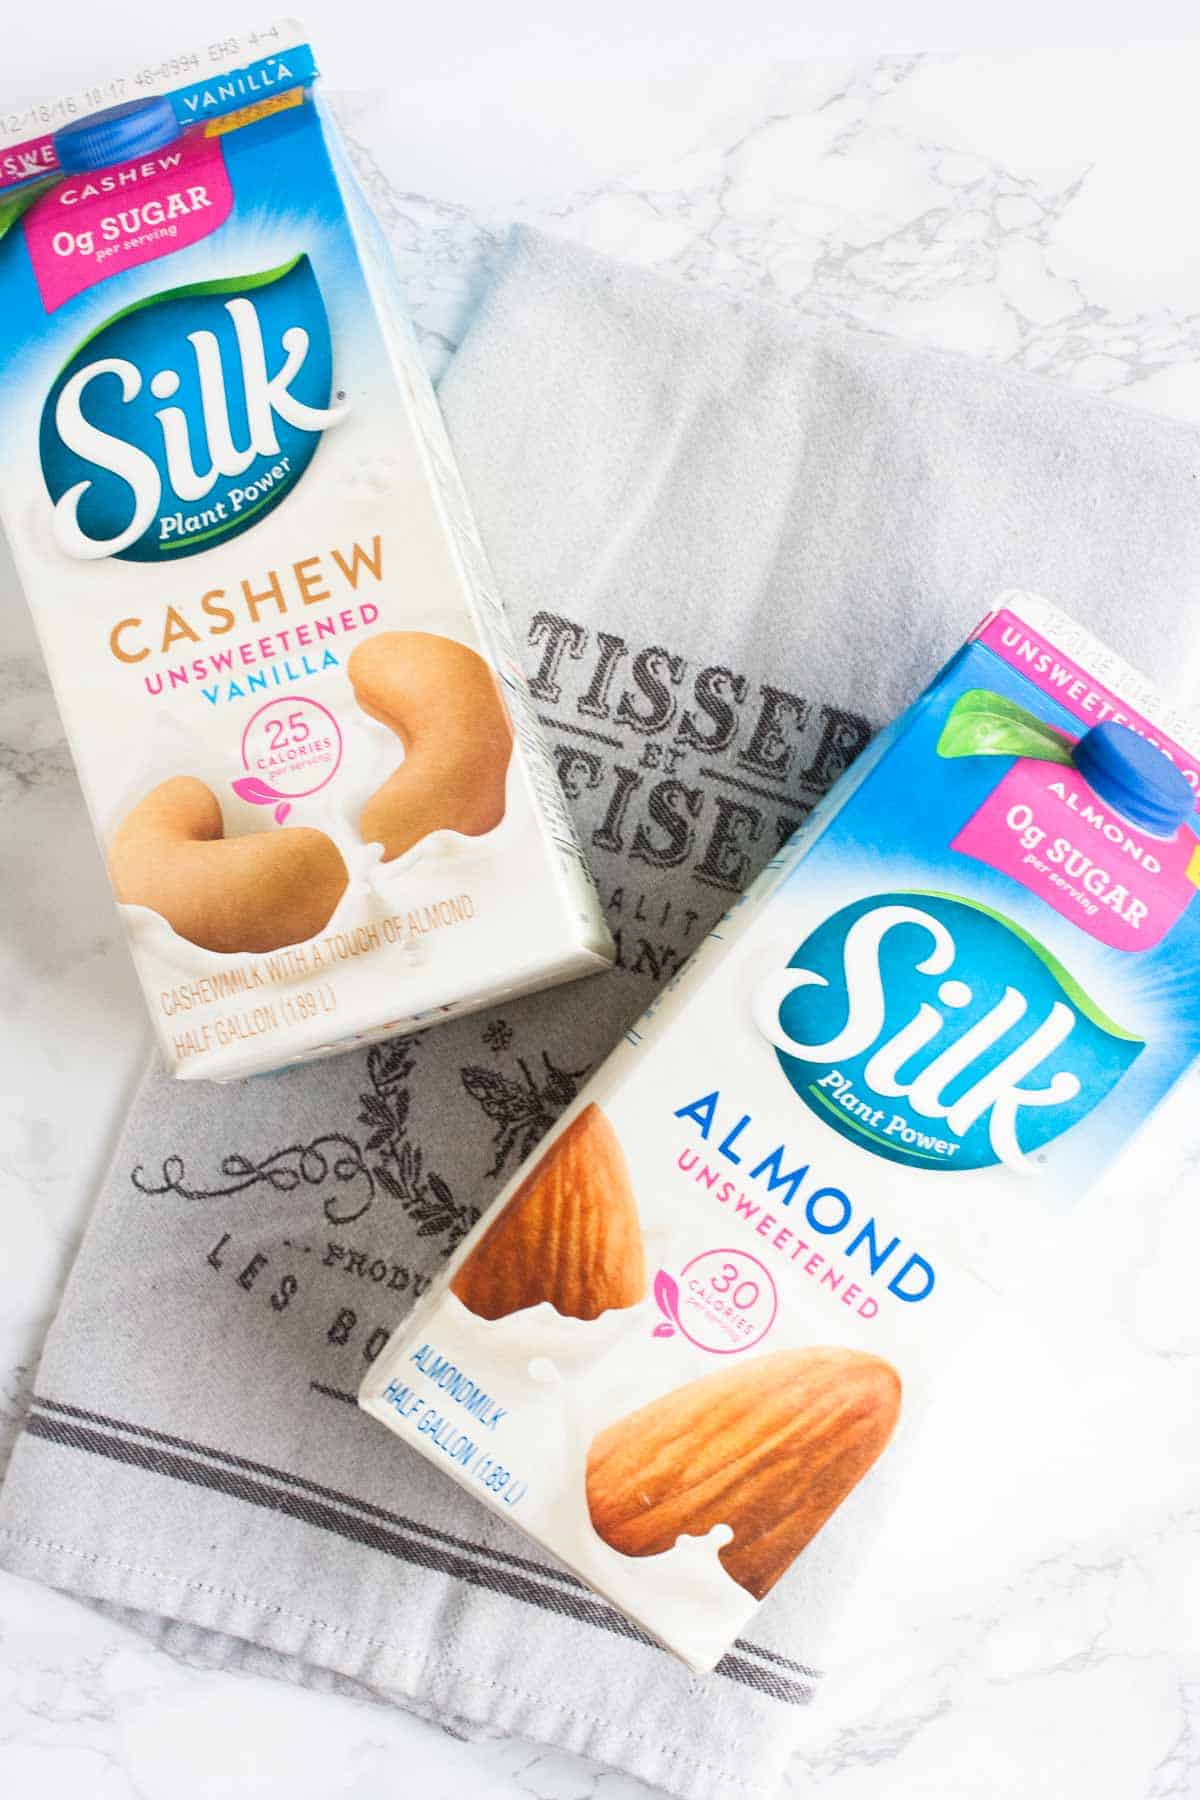 Silk dairy free milk containers laying on a grey towel